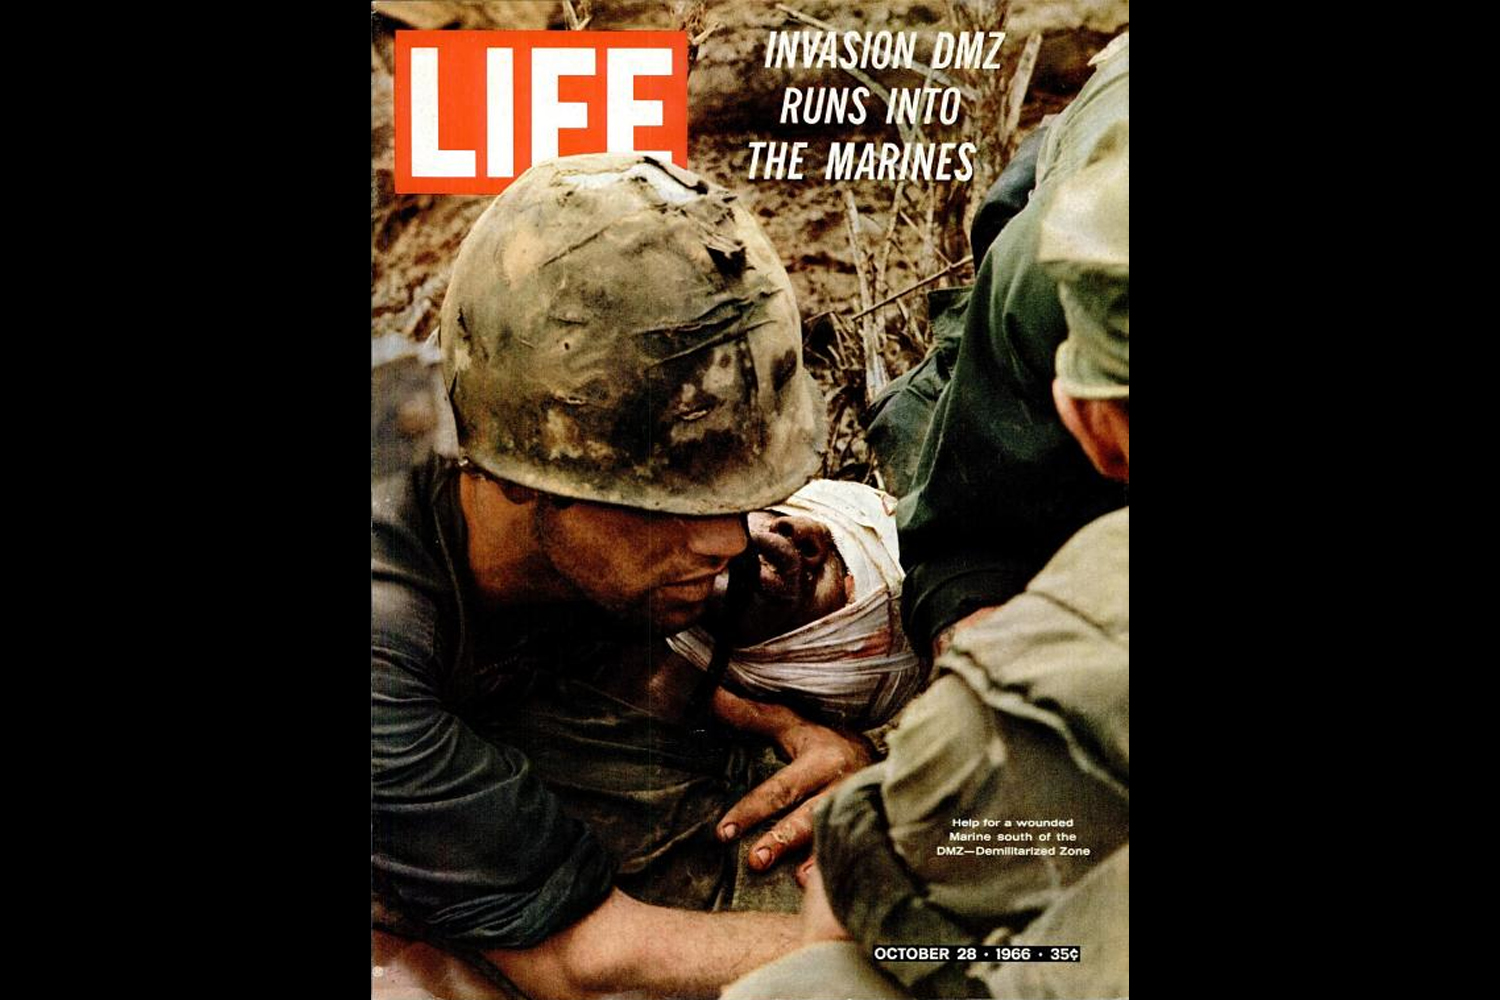 LIFE magazine, Oct. 28, 1966. NOTE: Best viewed in "full screen" mode; see button at right.